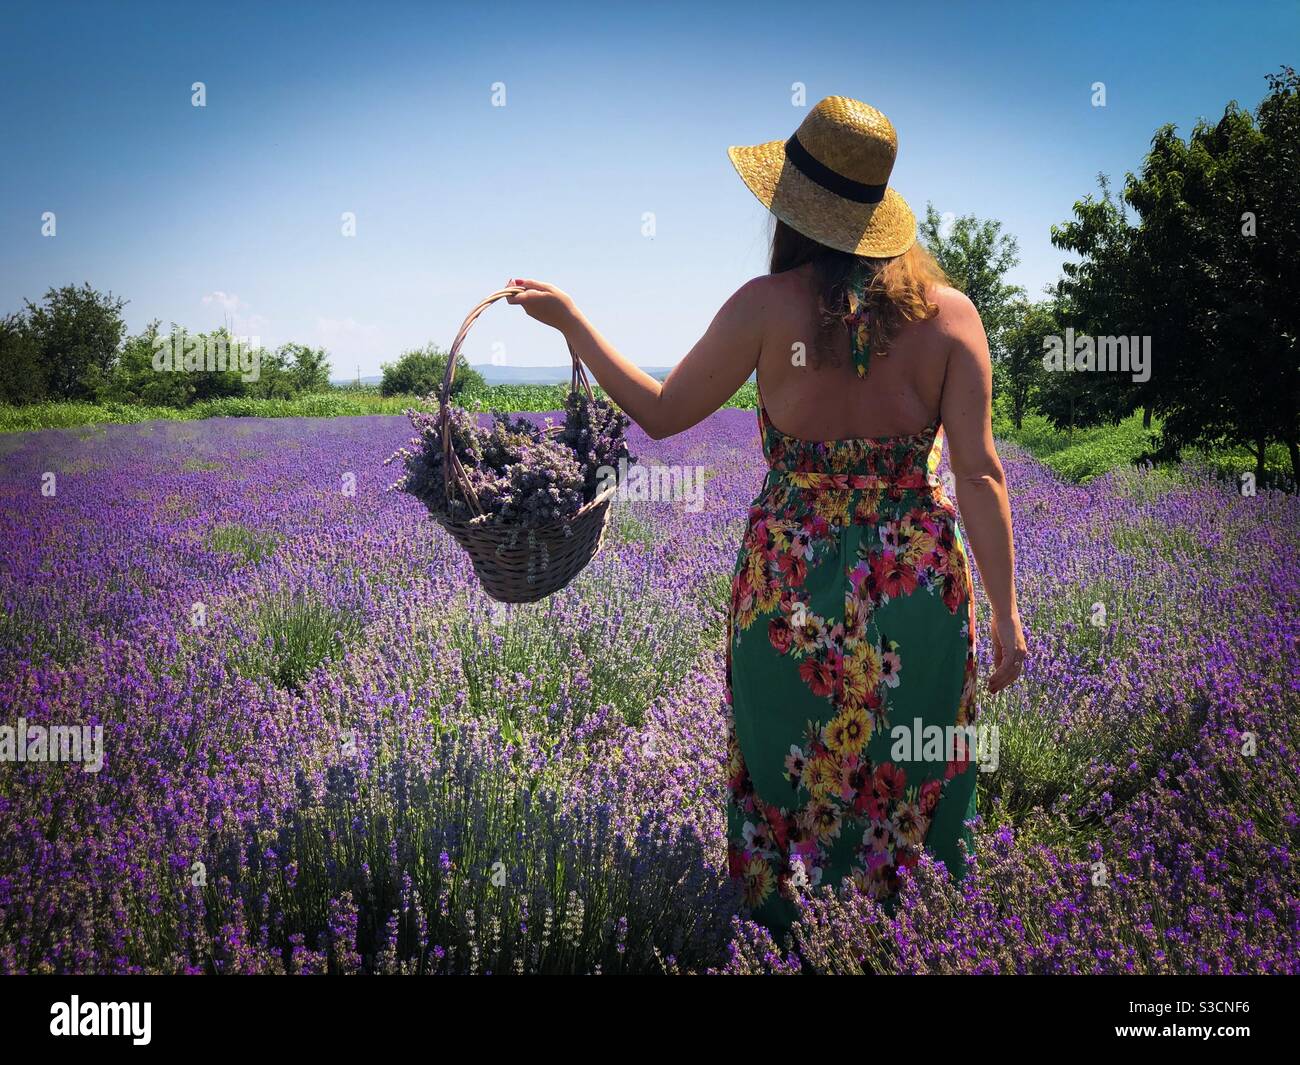 Woman wearing dress and hat holding a basket of lavender Stock Photo